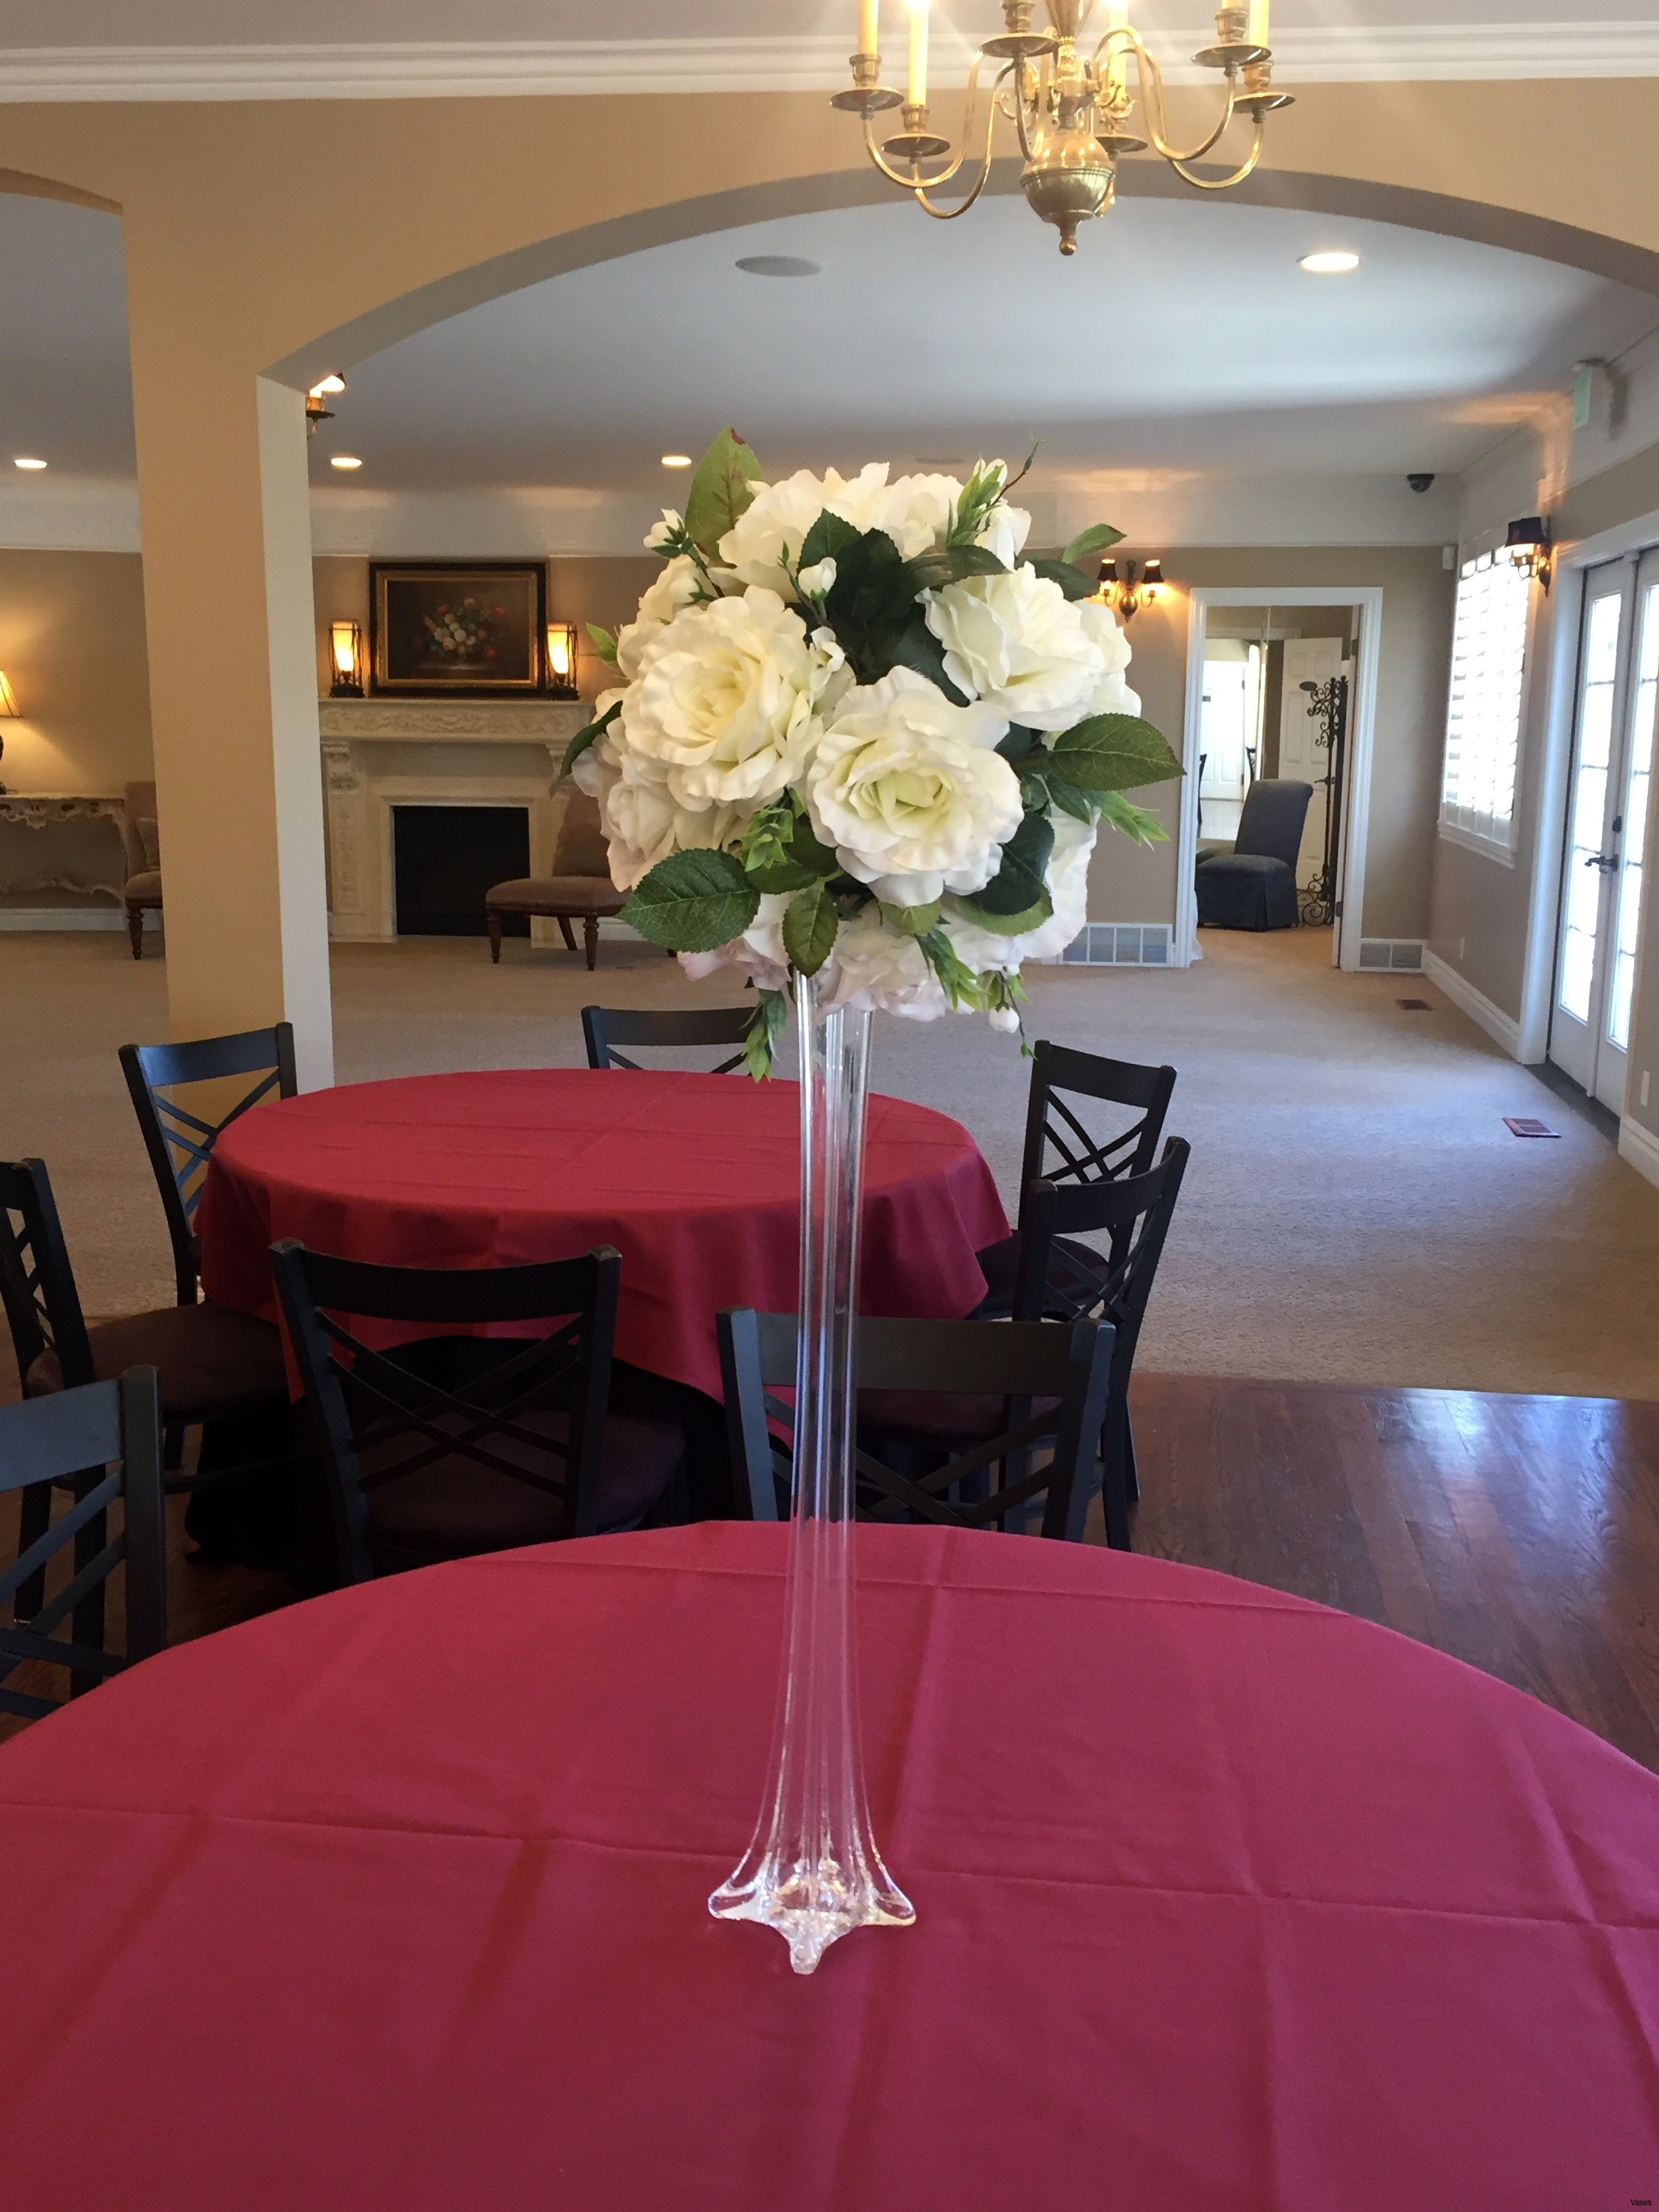 29 Fantastic Tall Vase Arrangements 2024 free download tall vase arrangements of hydrangea decorations wedding unique cool wedding ideas as for h within hydrangea decorations wedding lovely wedding decoration rental awesome living room magnifice